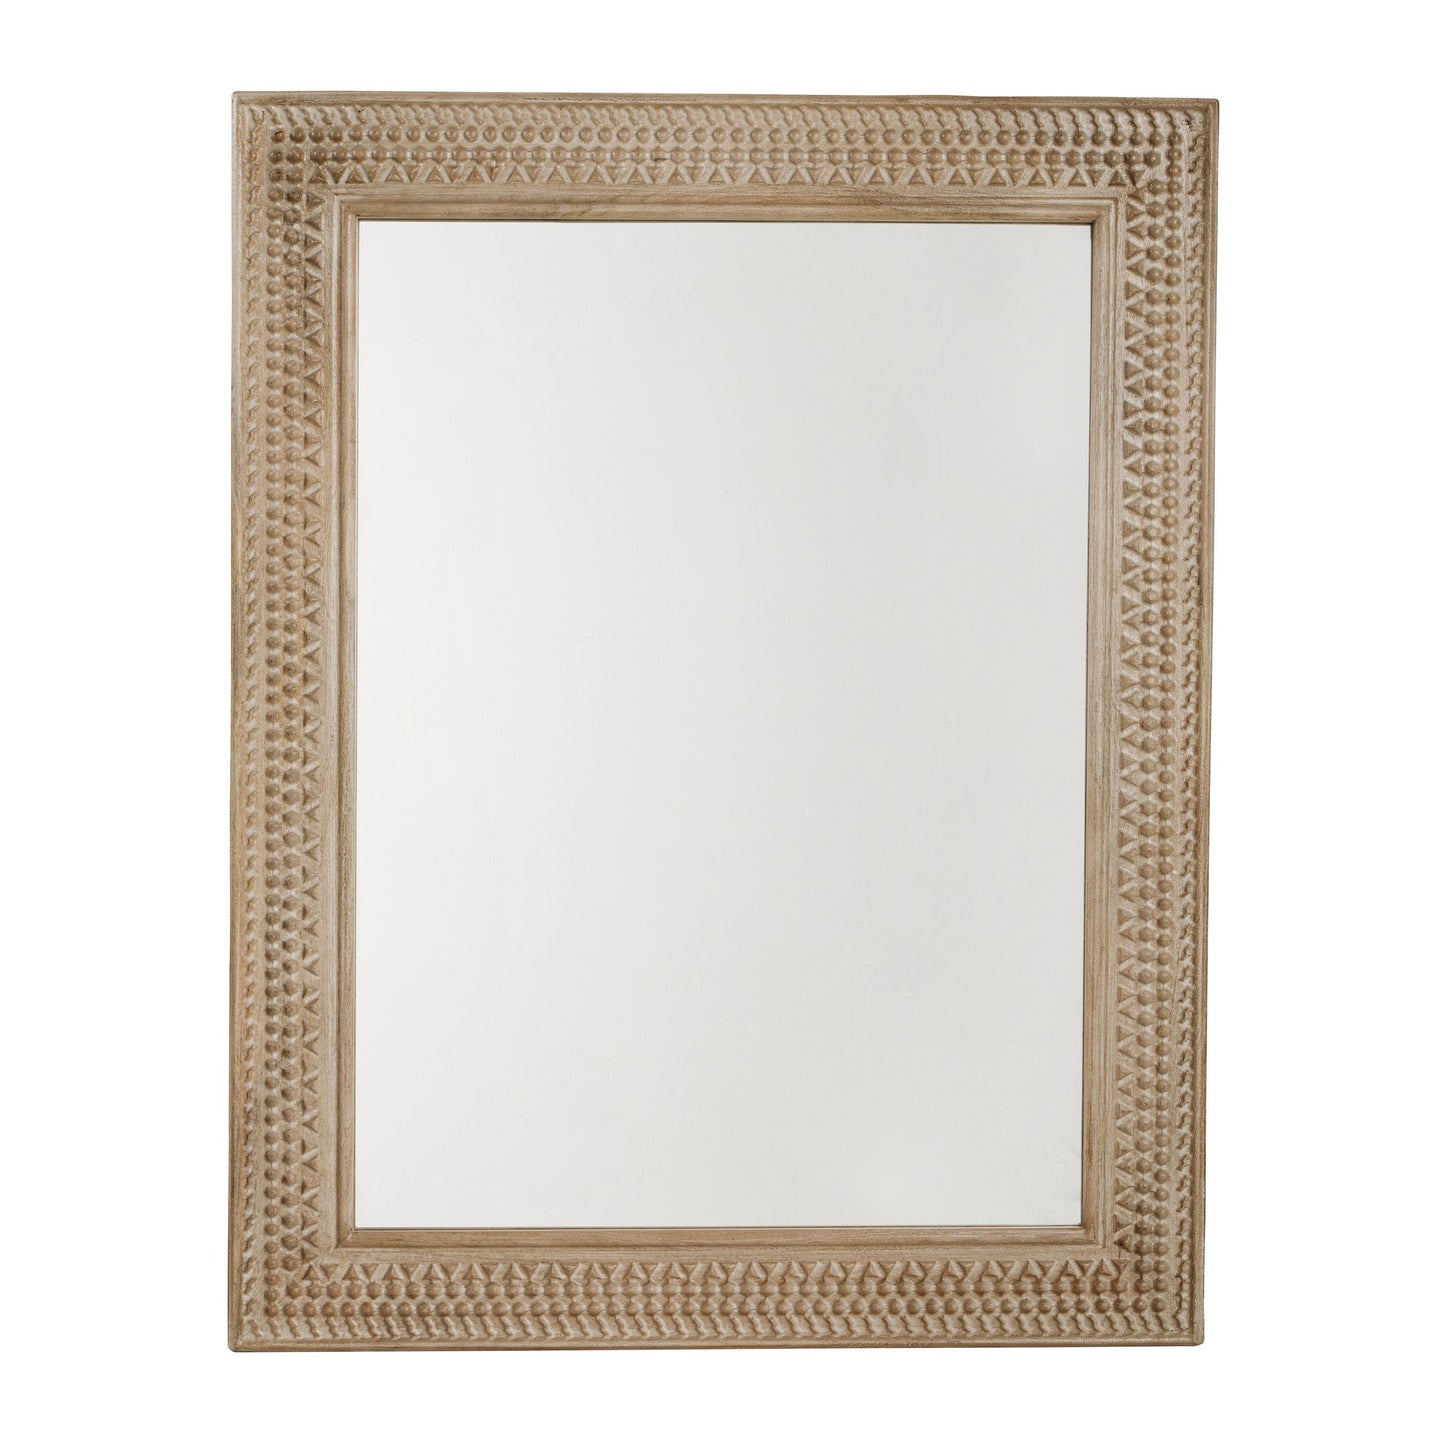 Signature Design by Ashley Belenburg Wall Mirror A8010273 IMAGE 2